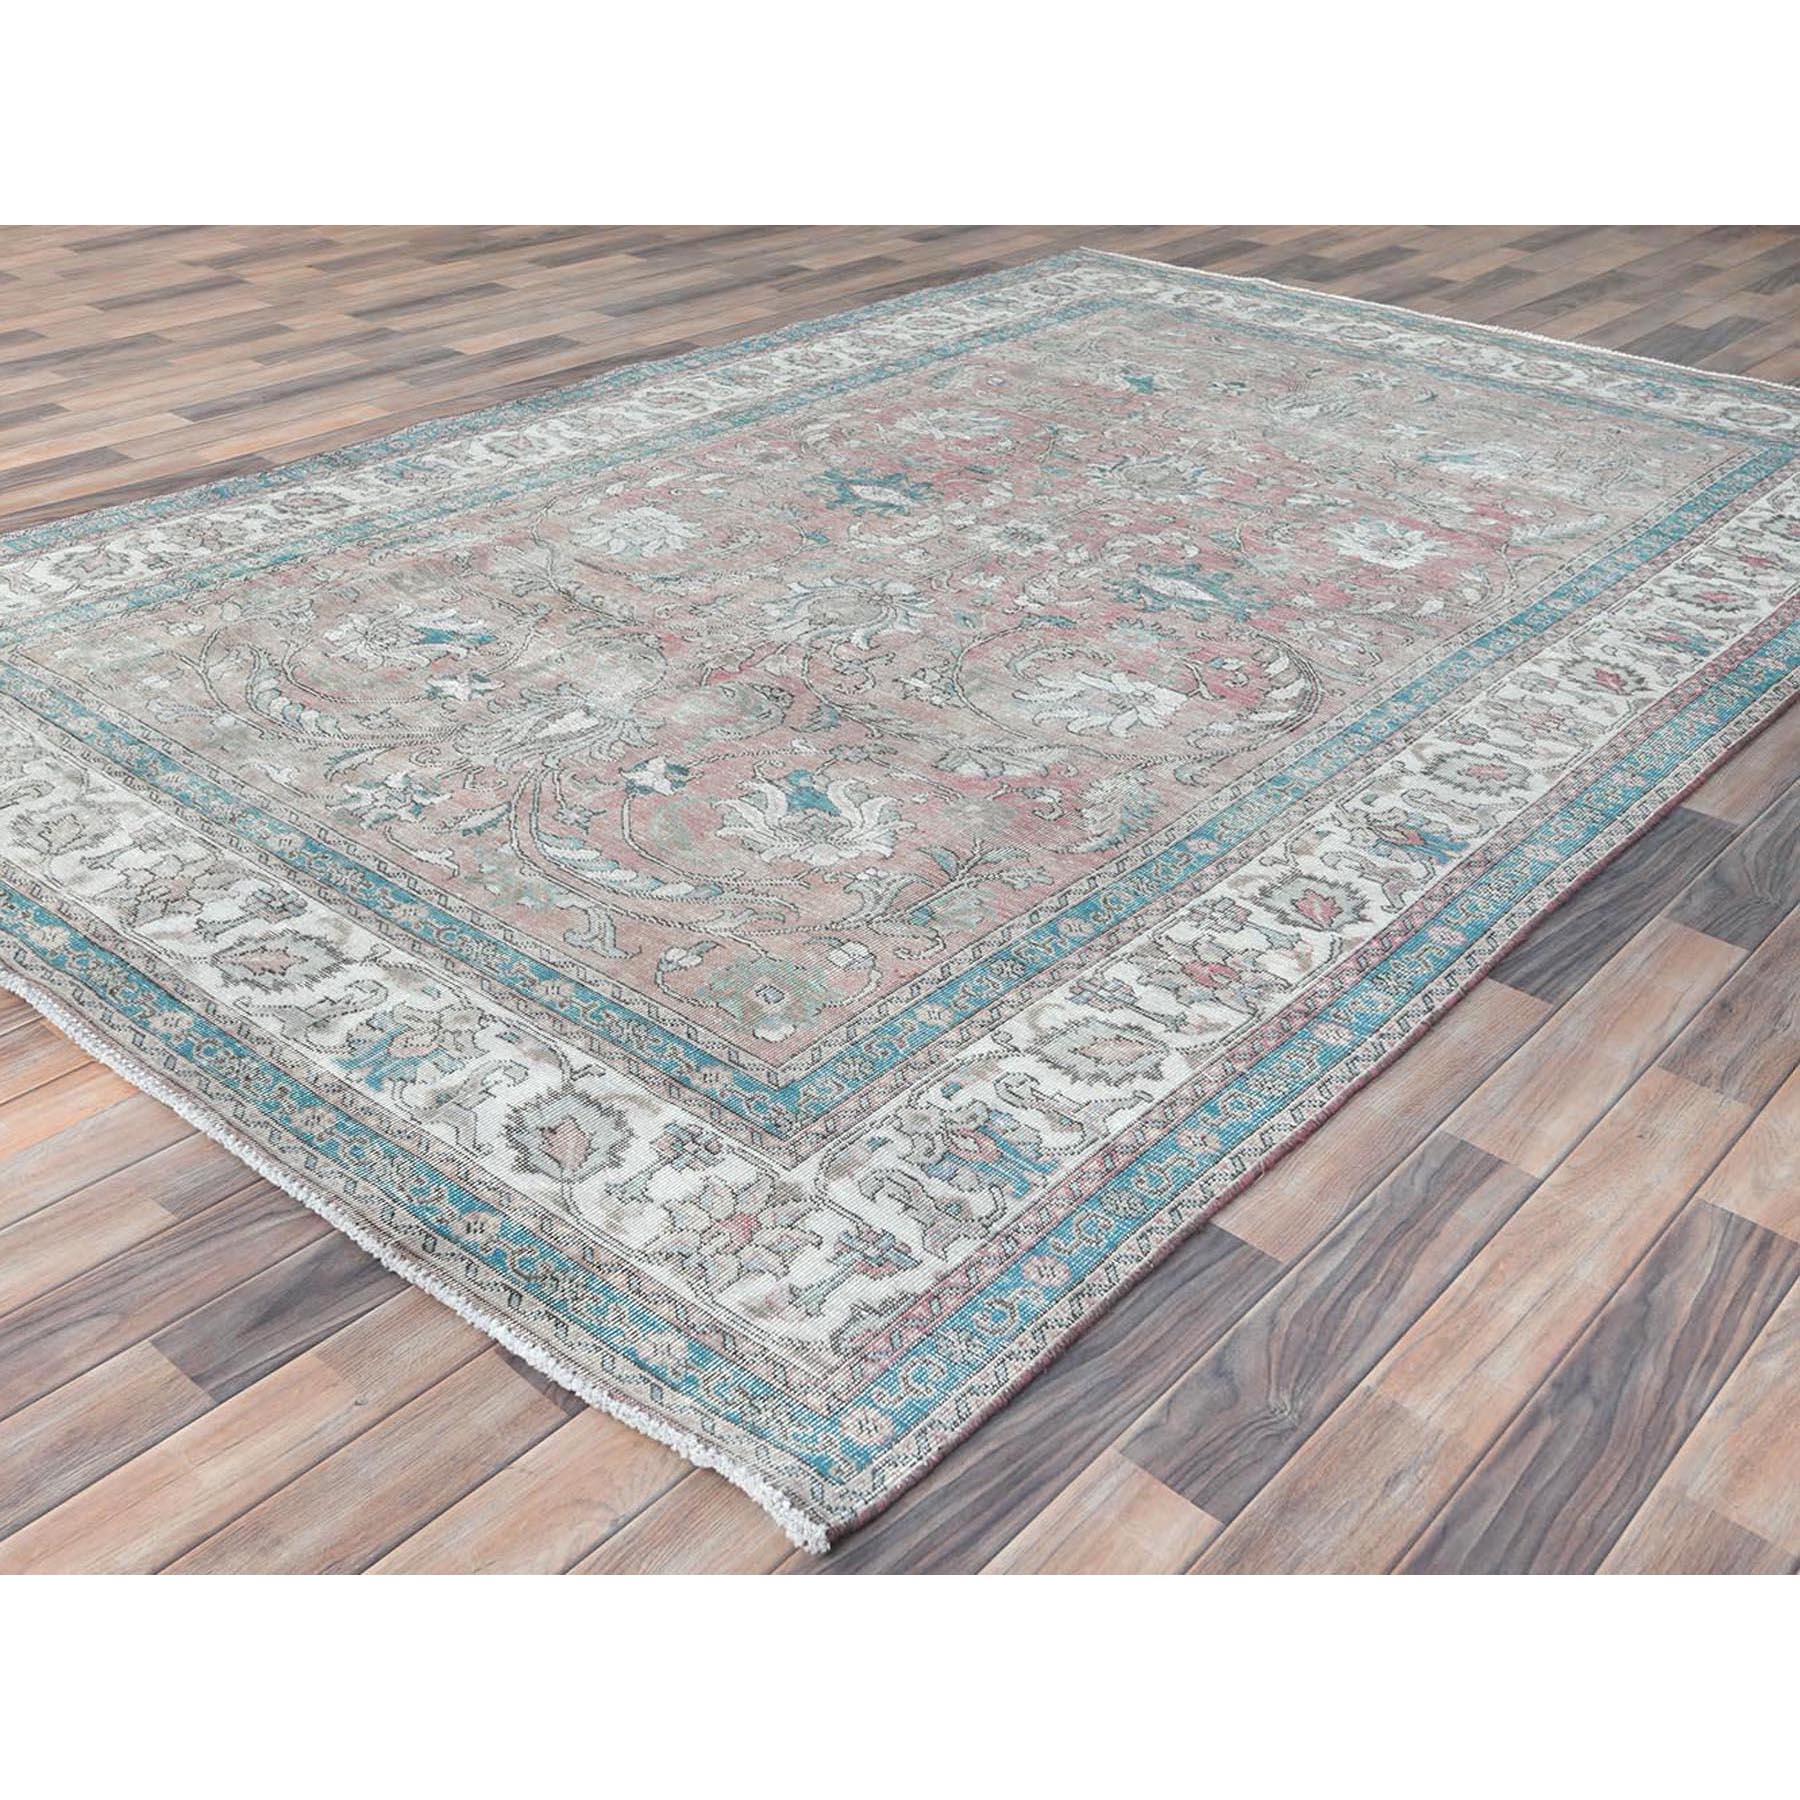 Light Red Vintage Persian Tabriz Distressed Look Worn Wool Hand Knotted Rug In Good Condition For Sale In Carlstadt, NJ